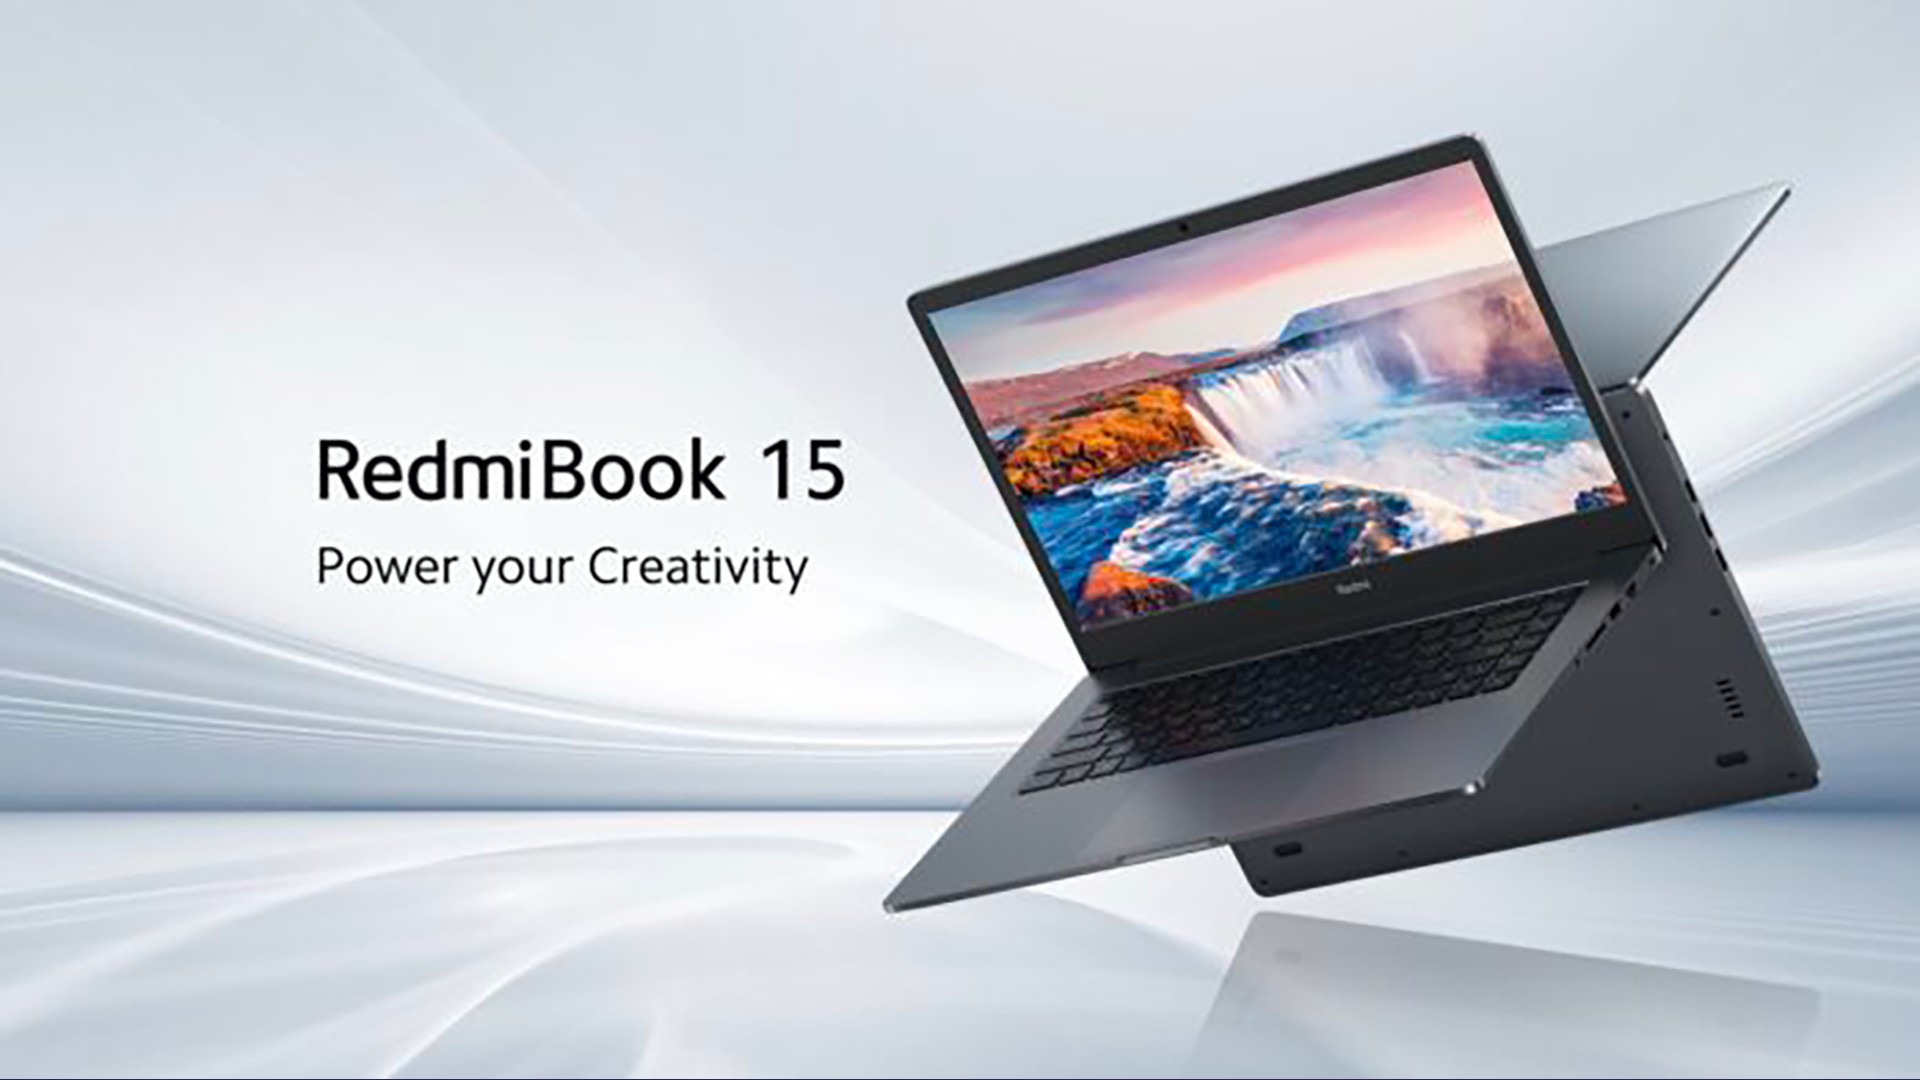 c 15 Launch Price In India From Rs 39,999? RedmiBook 15 Specs, First Sale, Availability